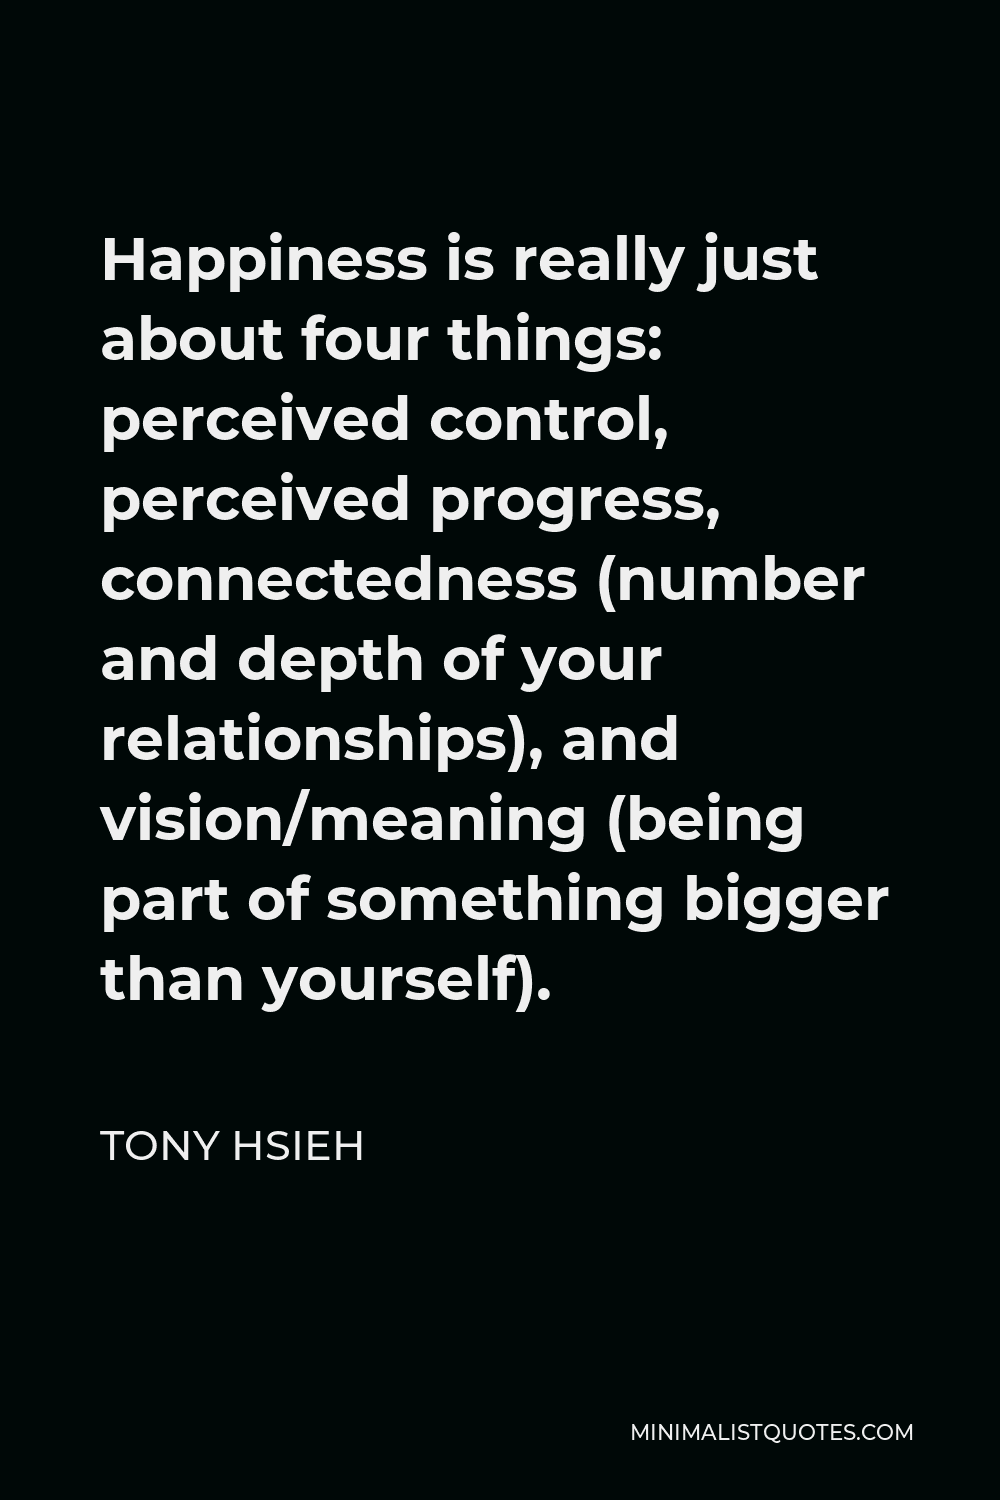 Tony Hsieh Quote - Happiness is really just about four things: perceived control, perceived progress, connectedness (number and depth of your relationships), and vision/meaning (being part of something bigger than yourself).